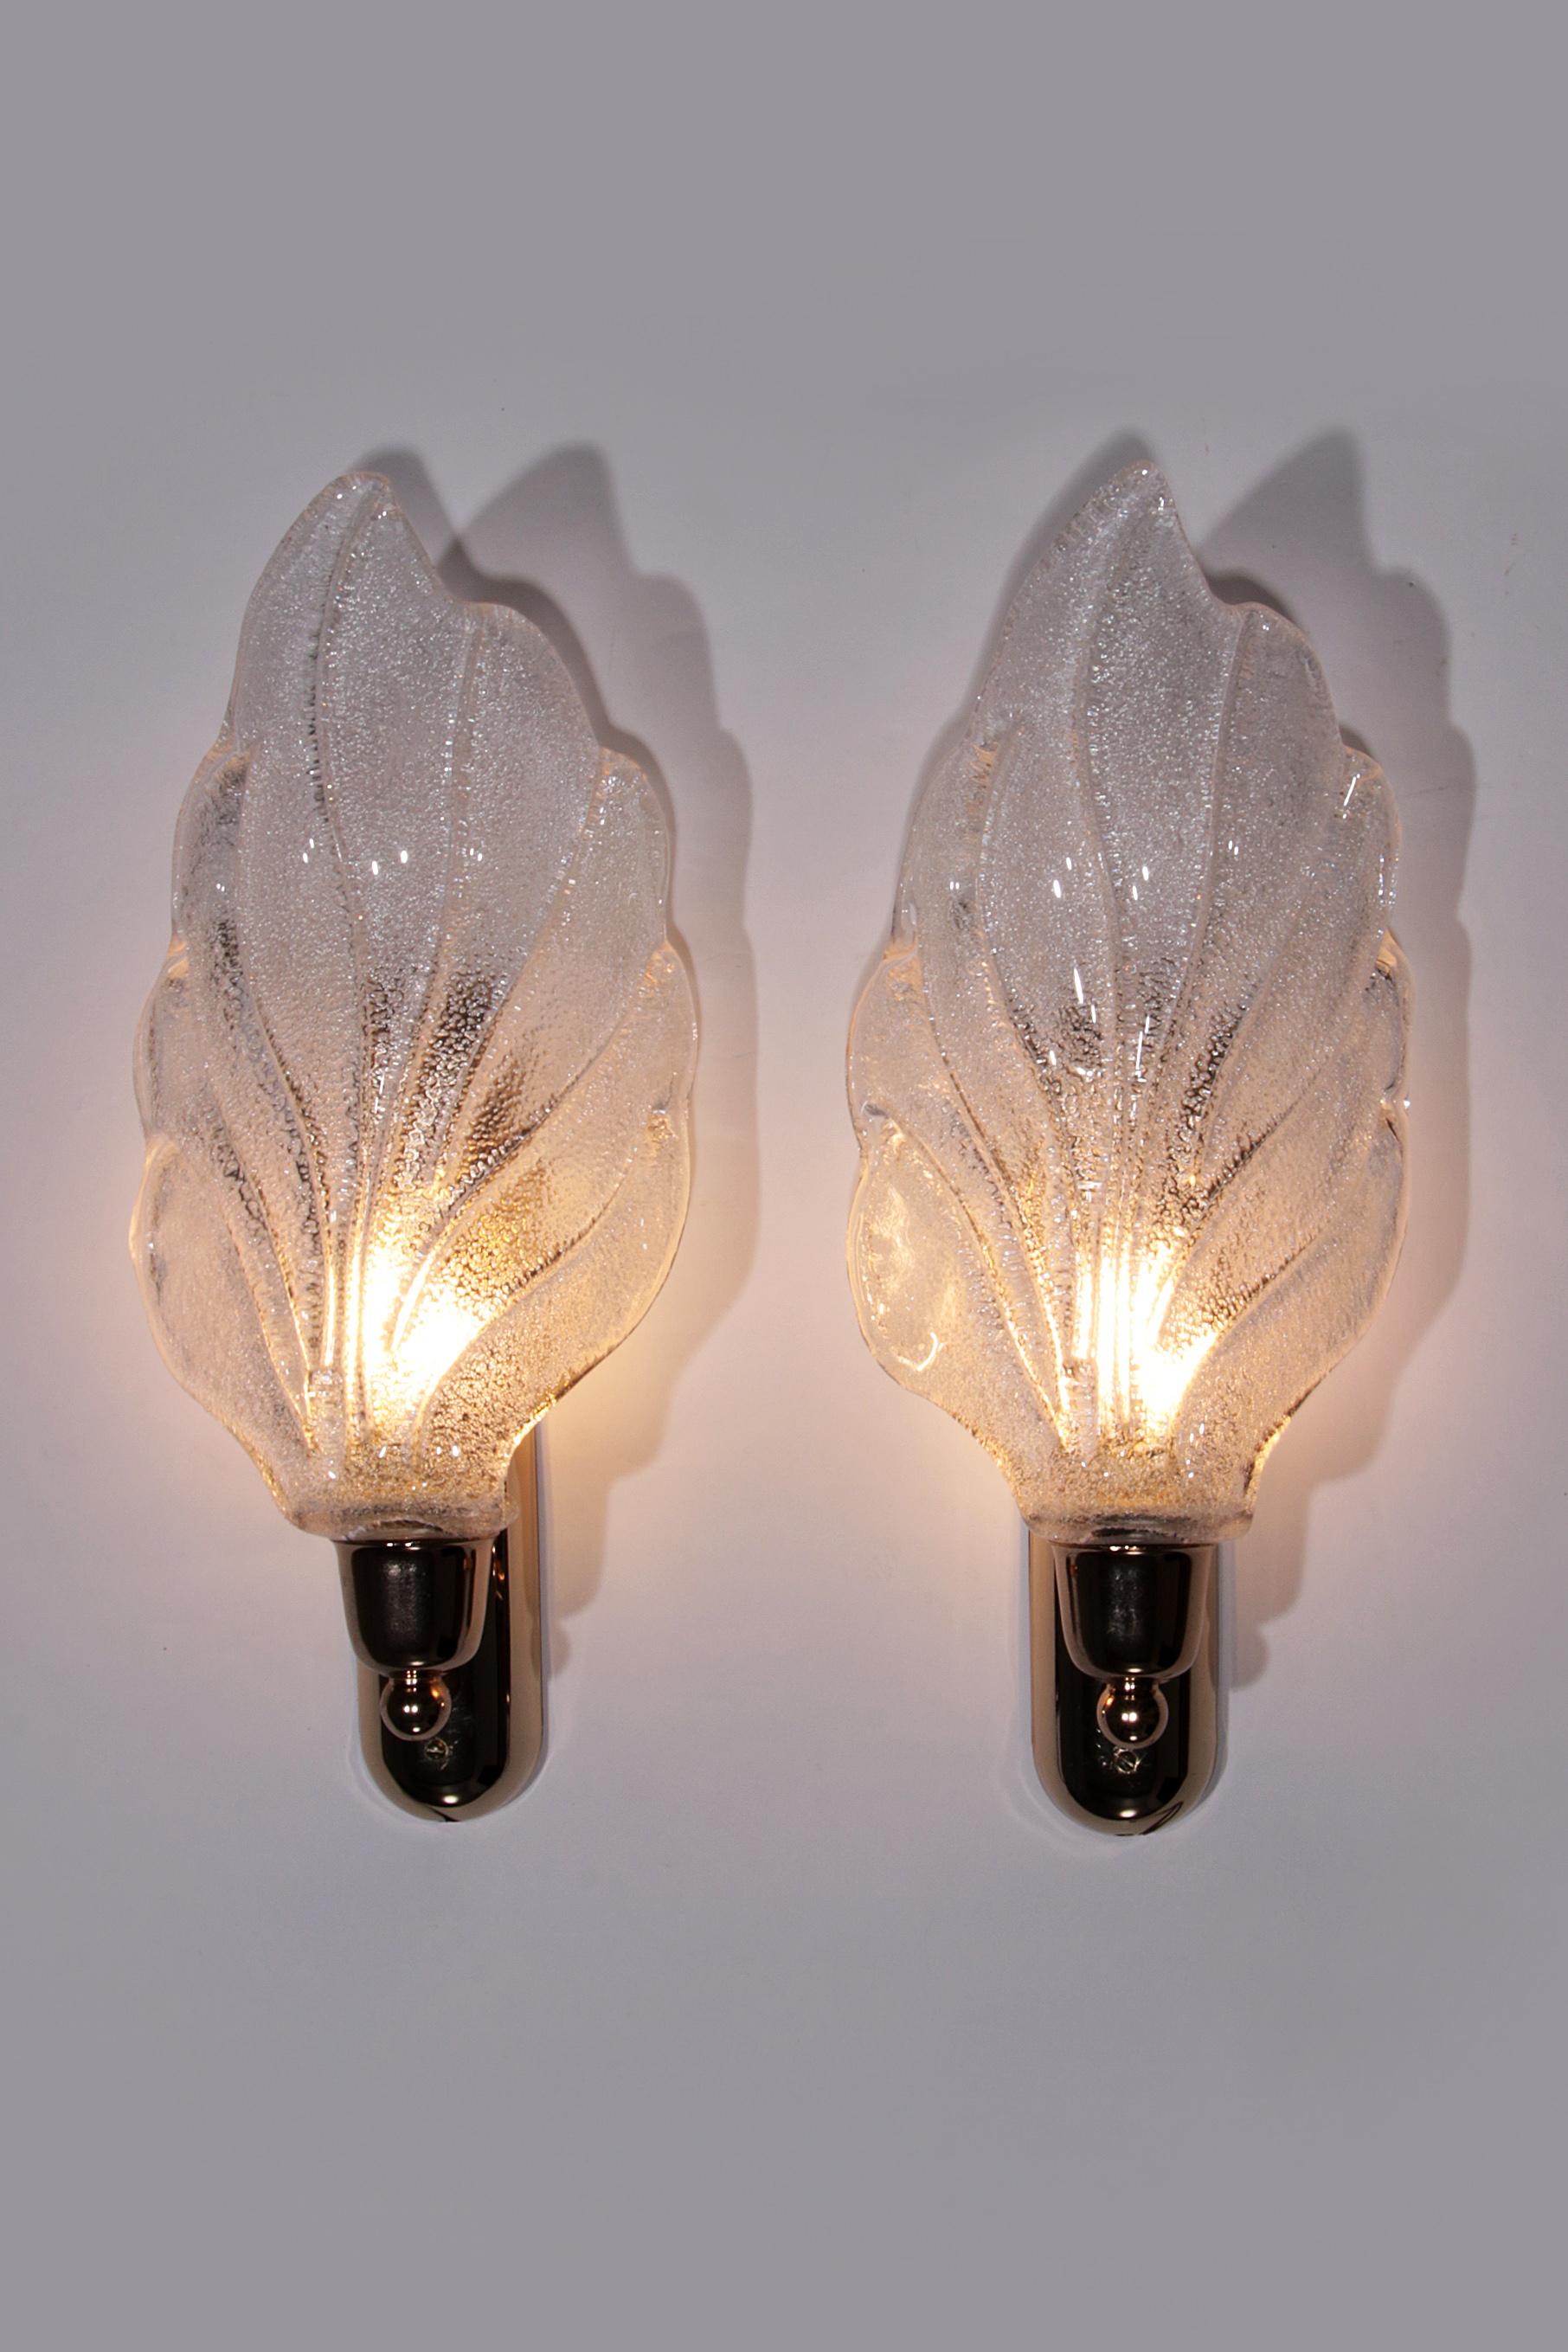 Italian Vintage Murano glass wall lamp leaf shape set of 2 - Italy 1970 For Sale